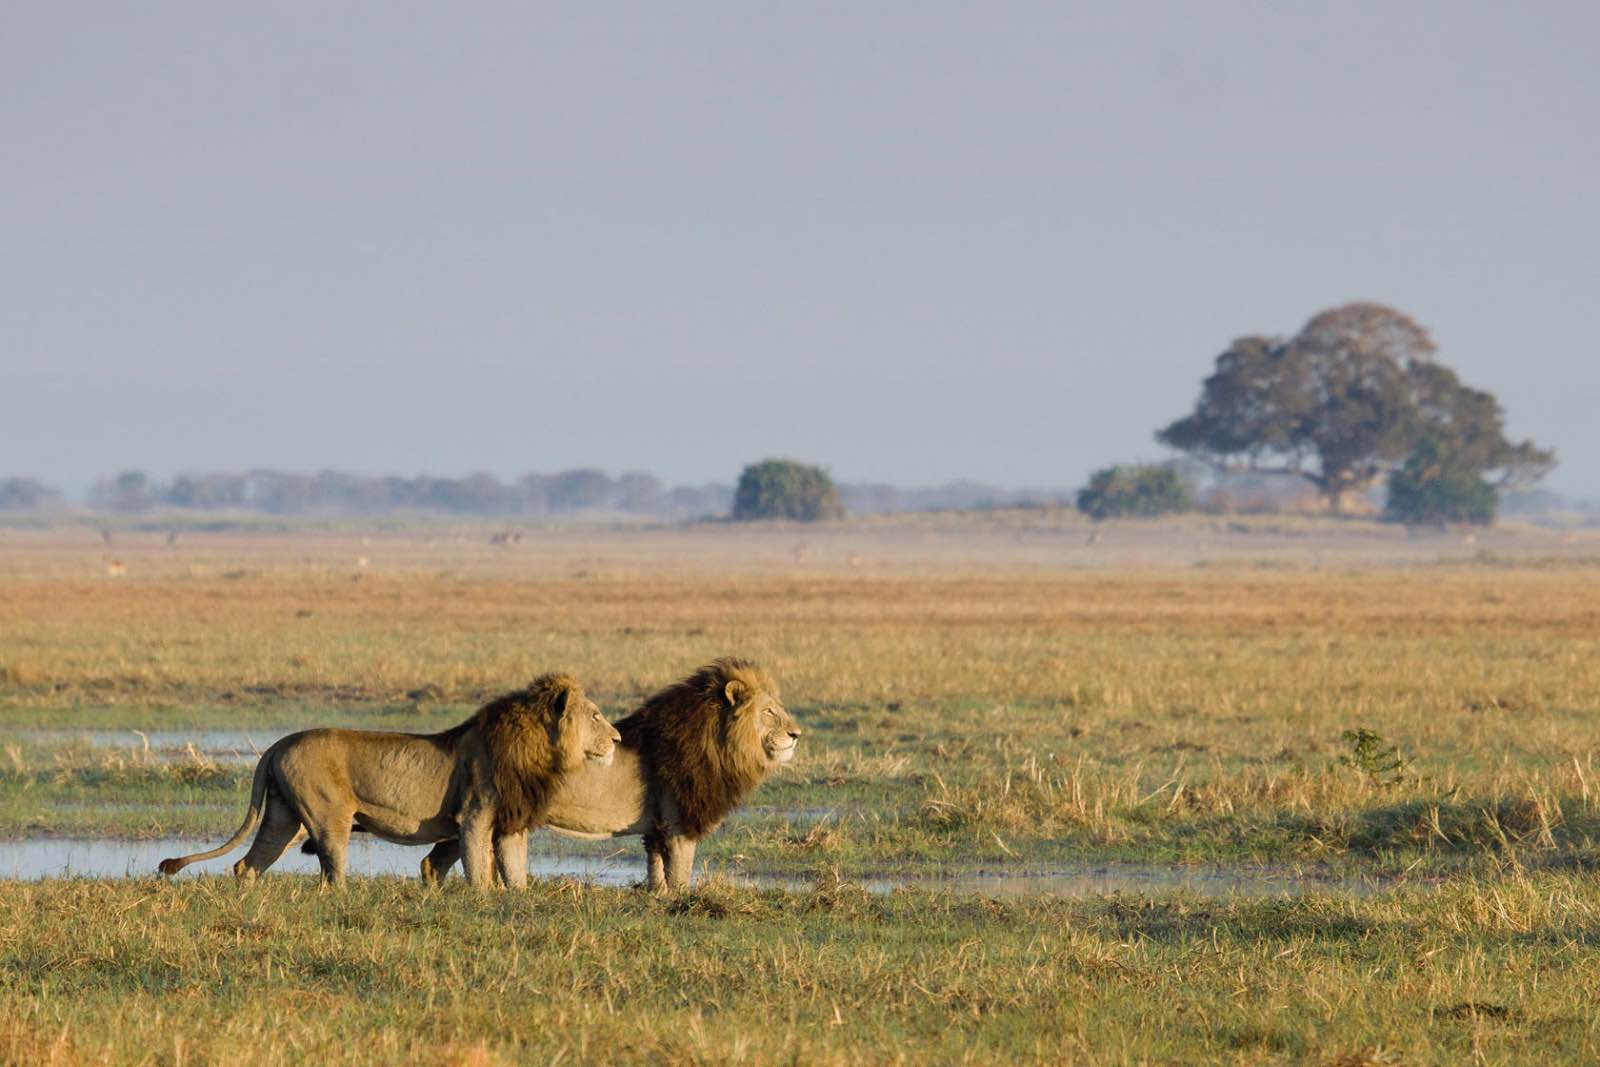 The famous lions of the Busanga Plains are an intimidating presence